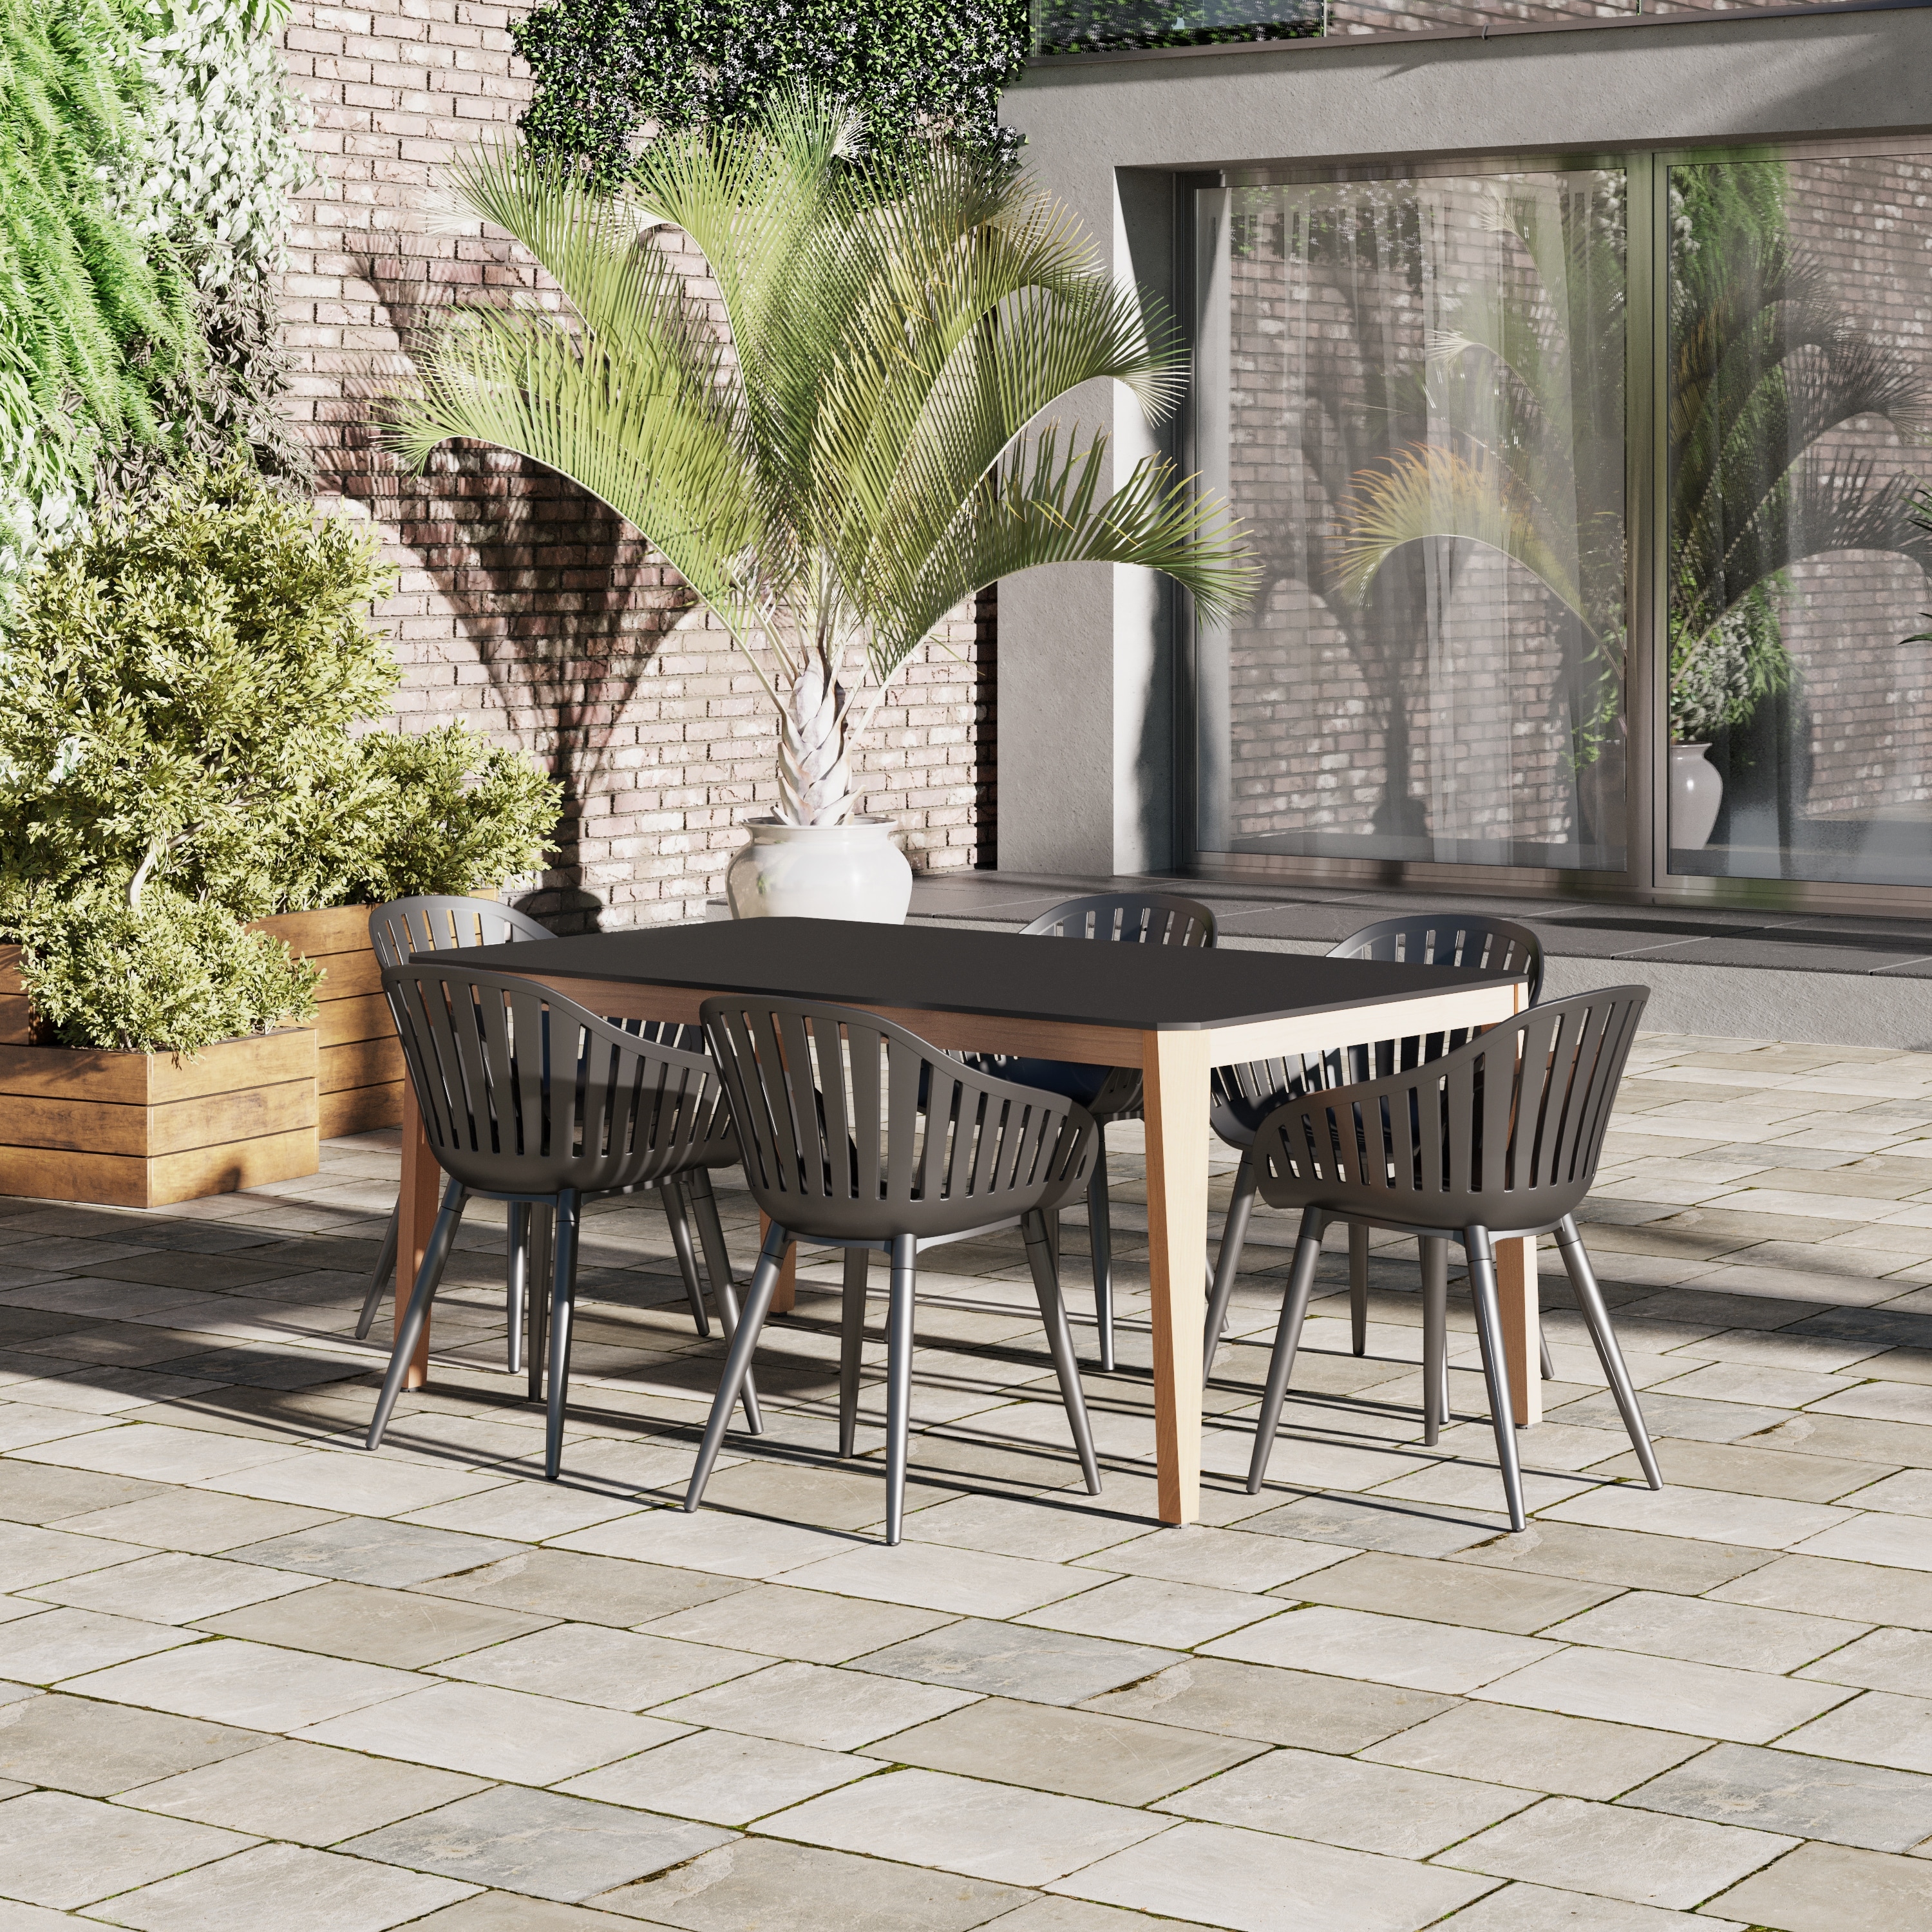 Amazonia Phairer Fsc Certified Wood Outdoor Patio Dining Set